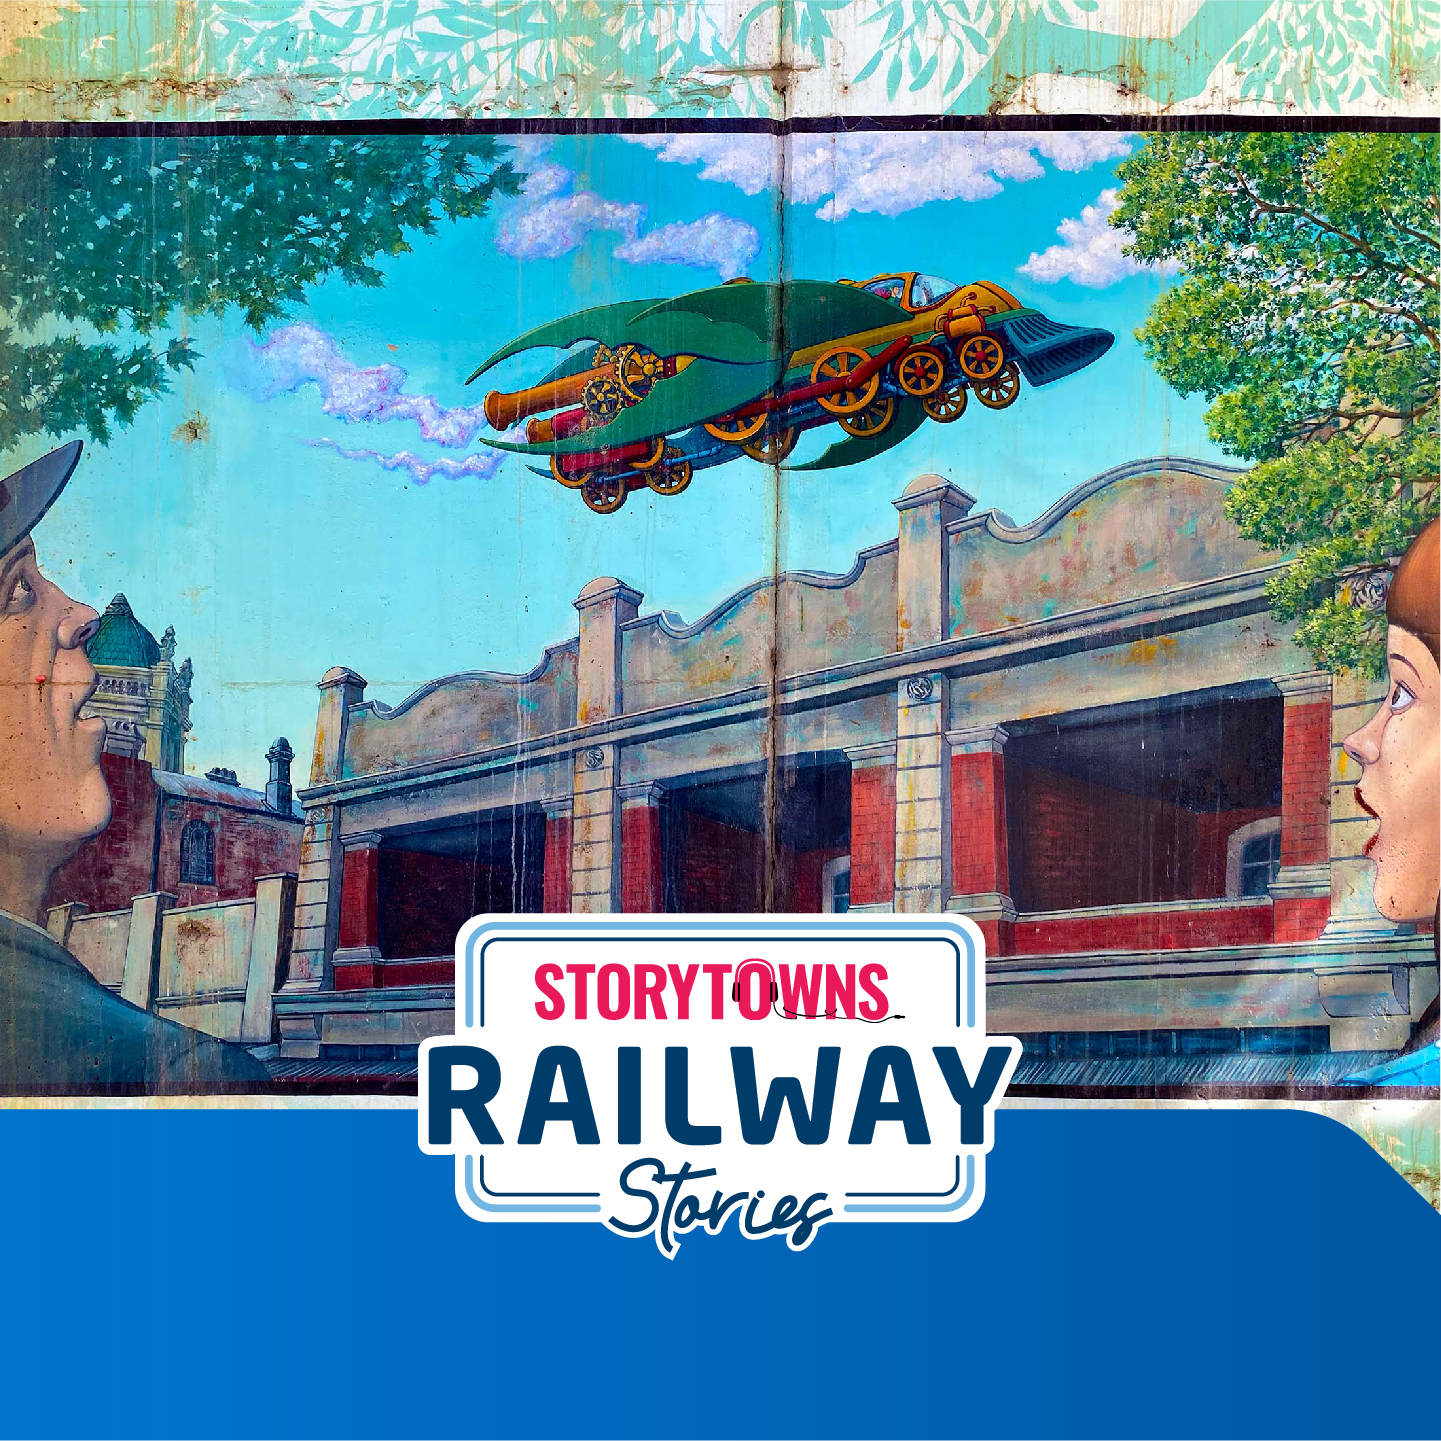 Illustration for the Railway Stories podcast for the Belgrave and Lilydale Metro Train Line.